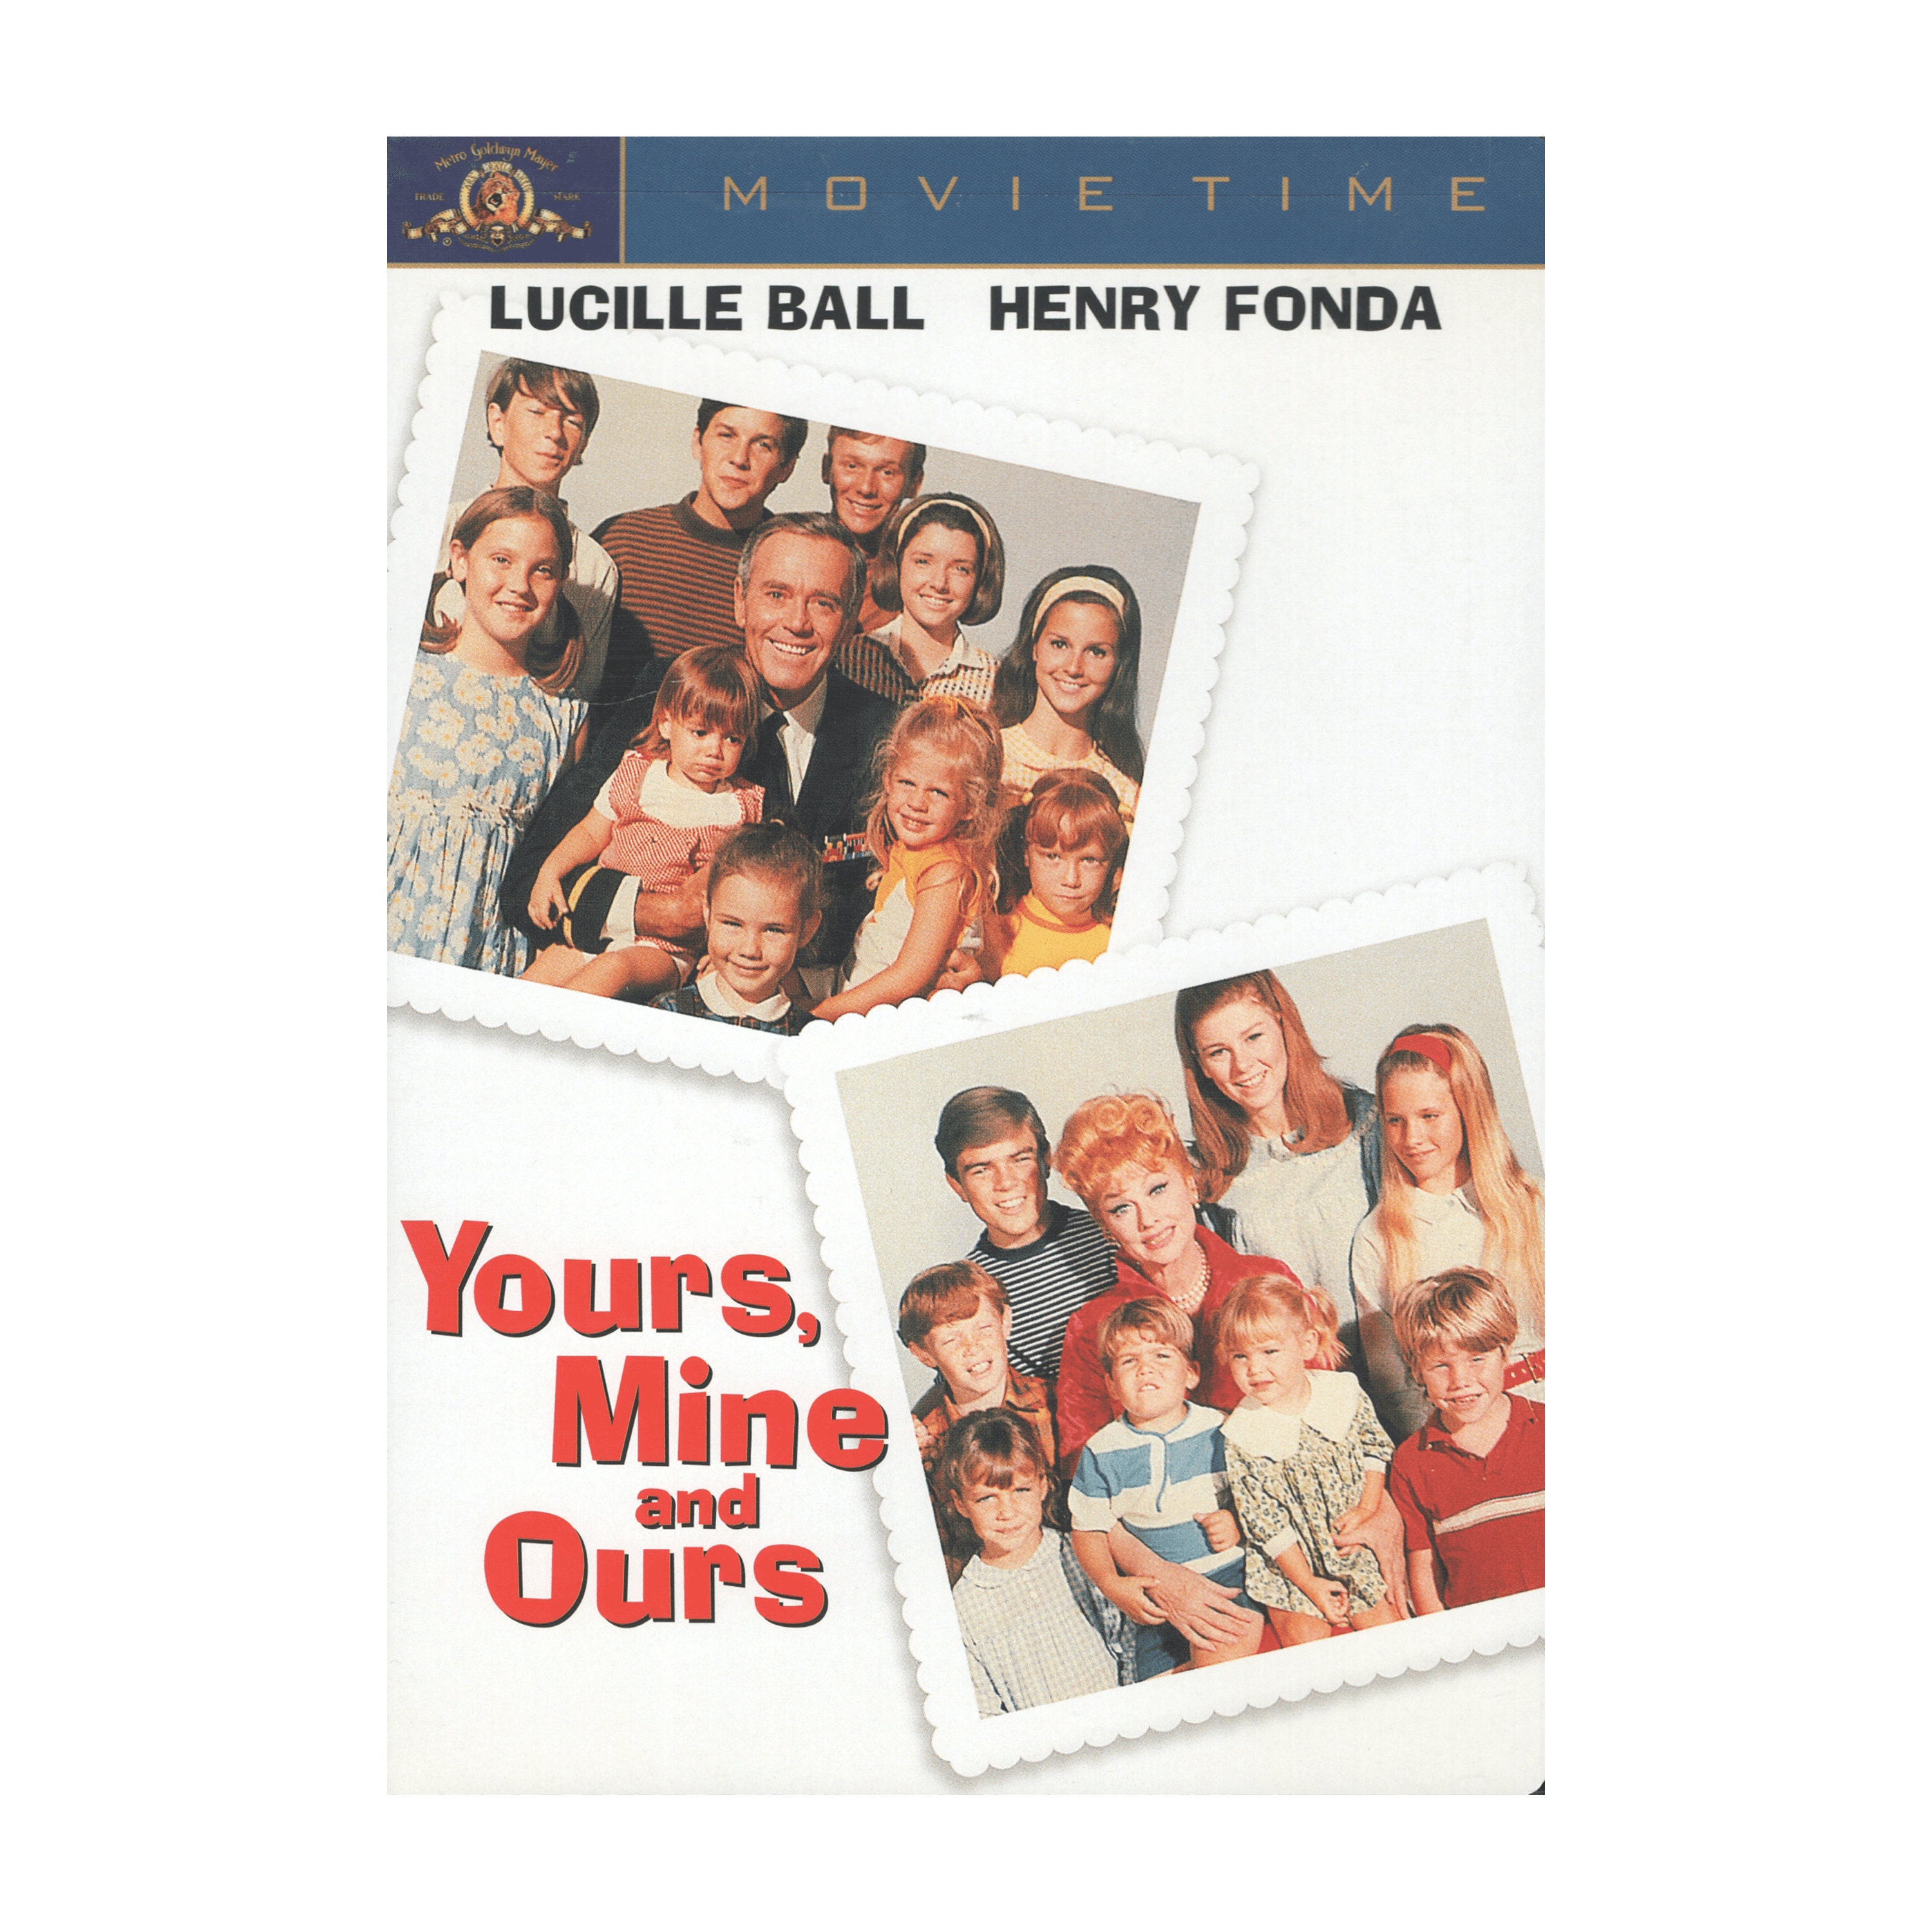 Etsy　Yours　1968　India　and　Mine　DVD:　Ours